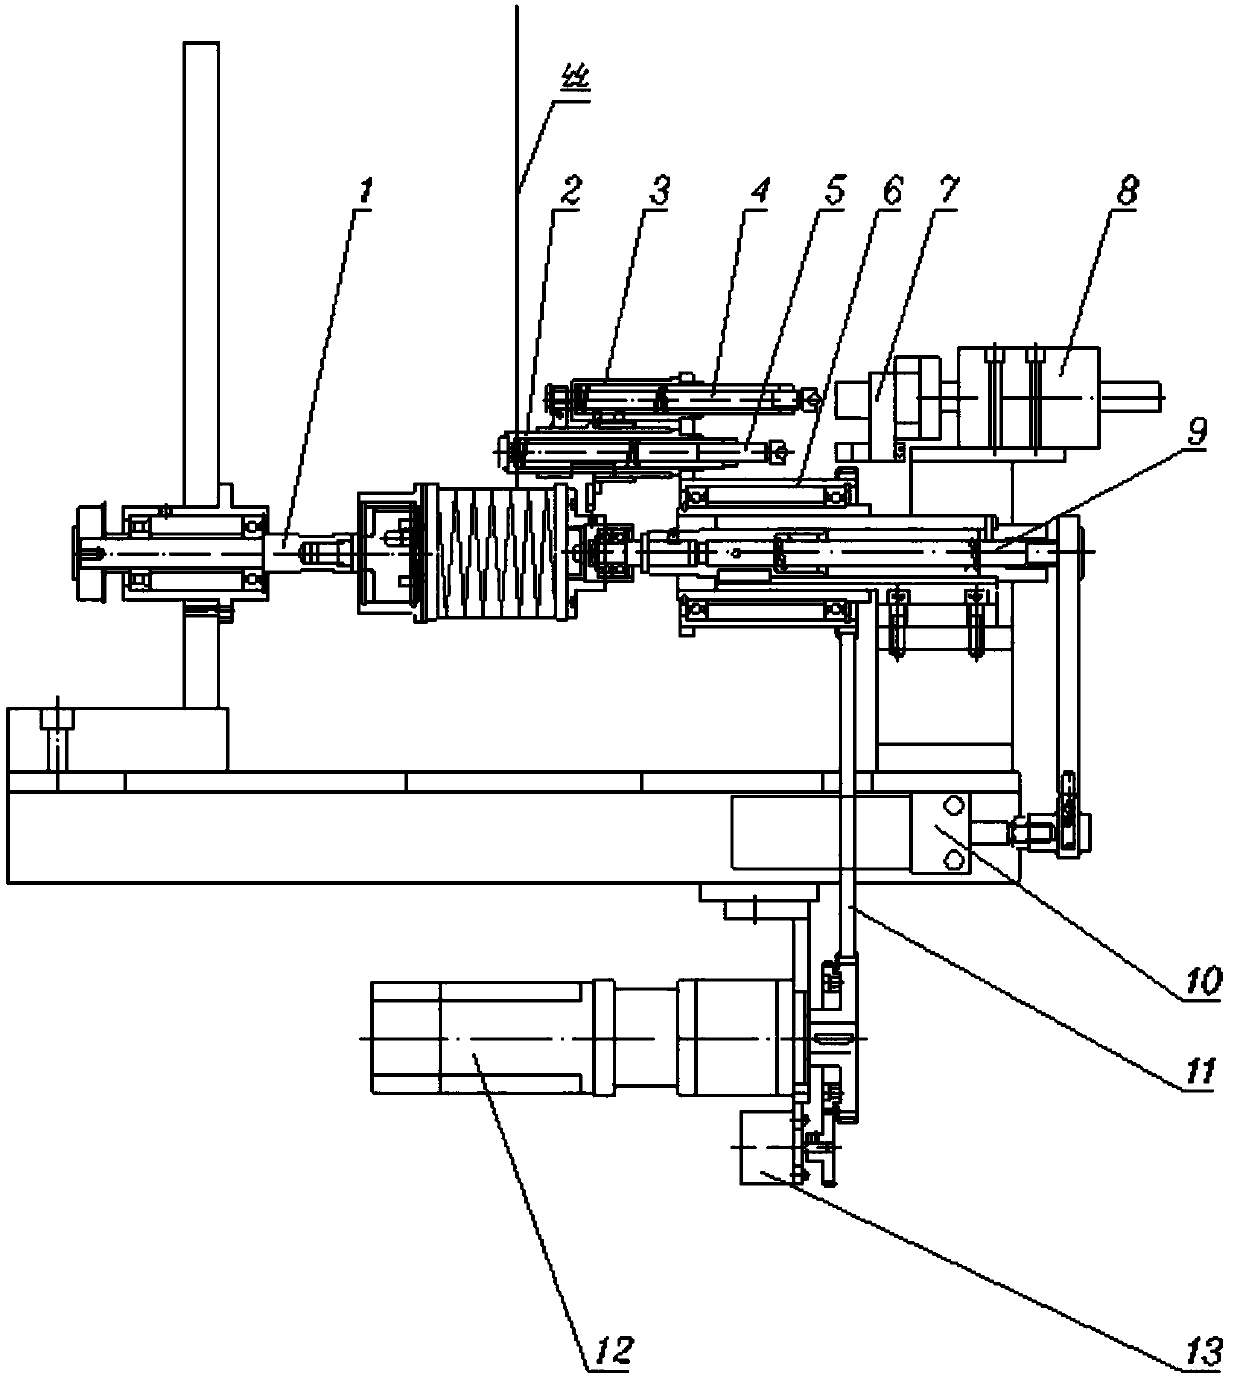 Automatic knotting device of full-automatic doubling mechanism